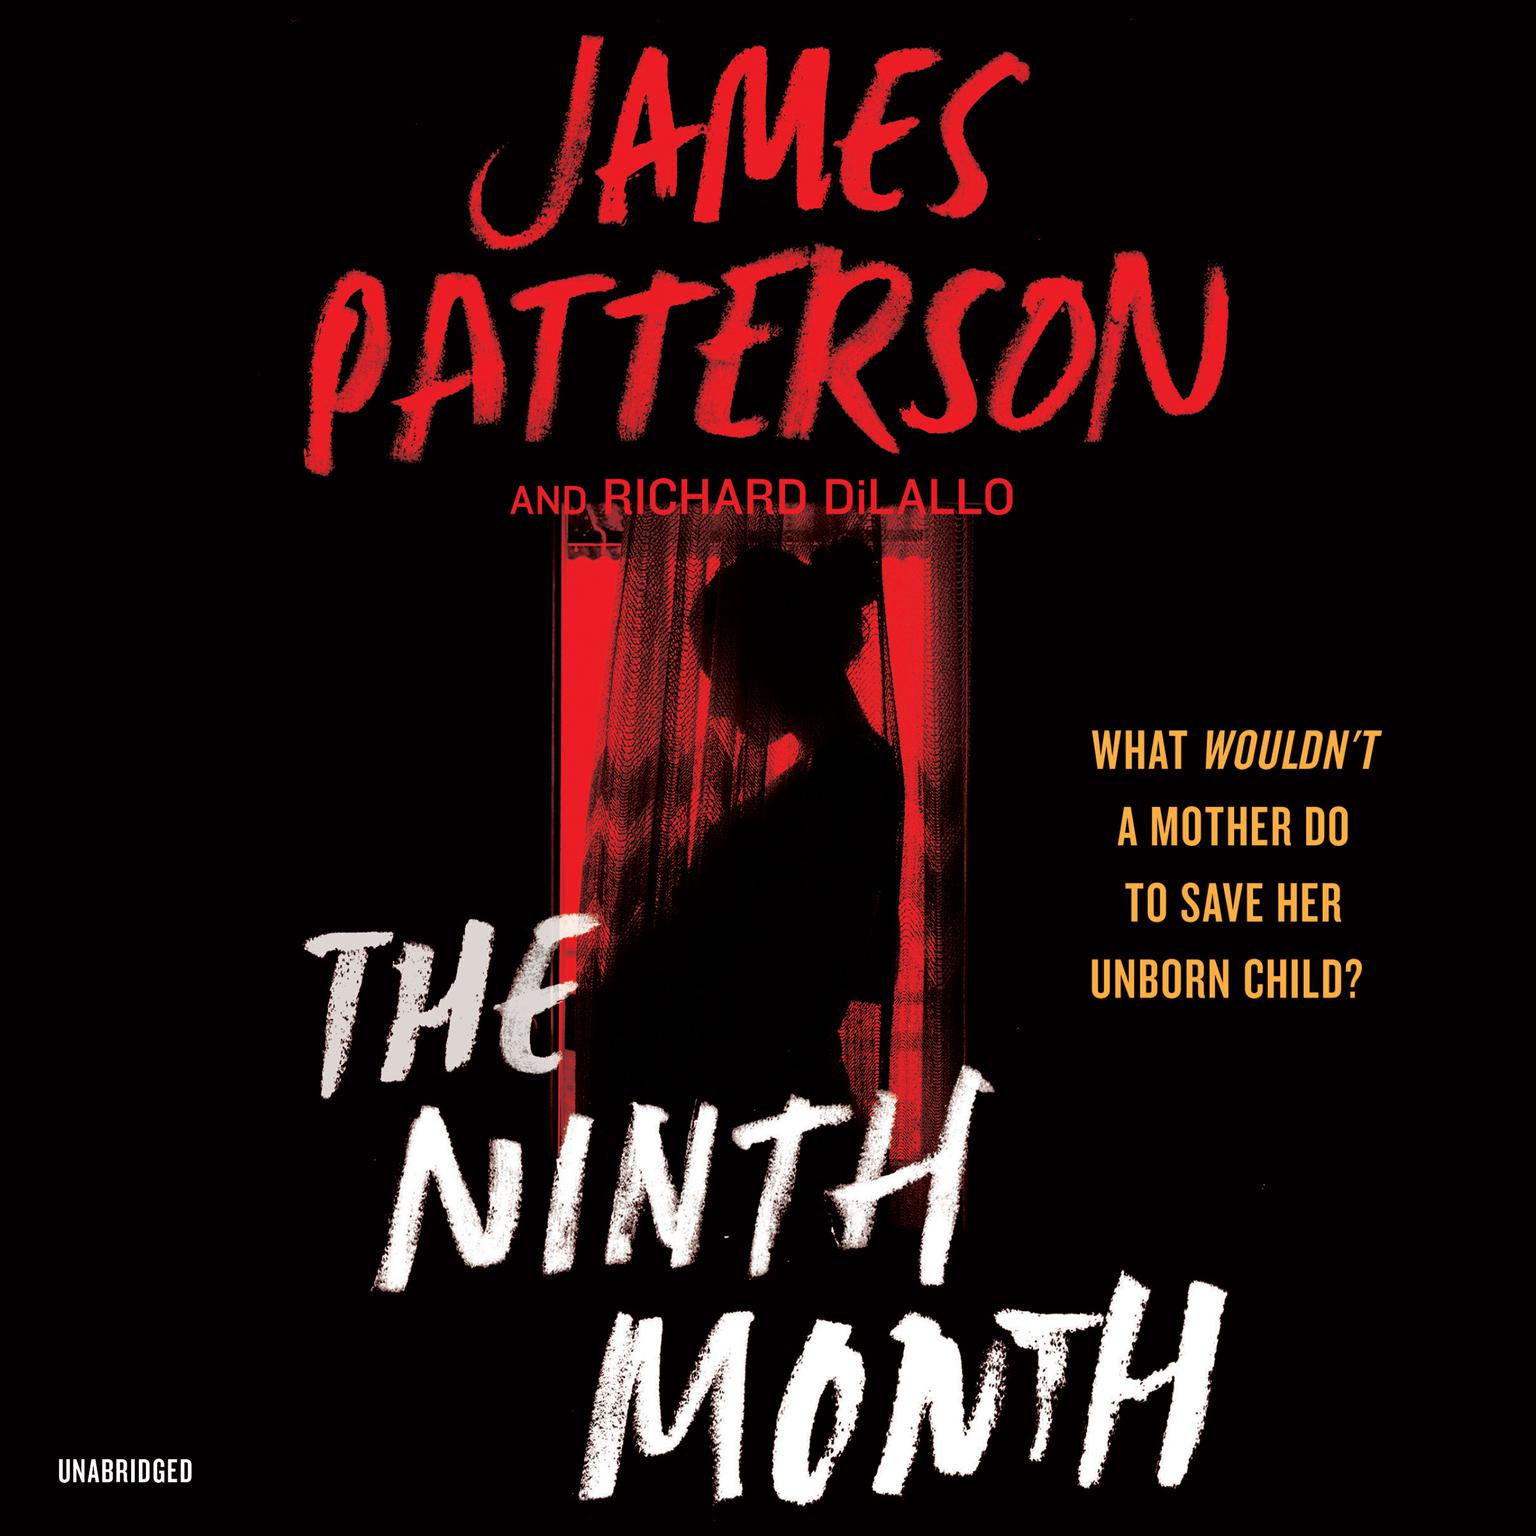 The Ninth Month Audiobook, by James Patterson